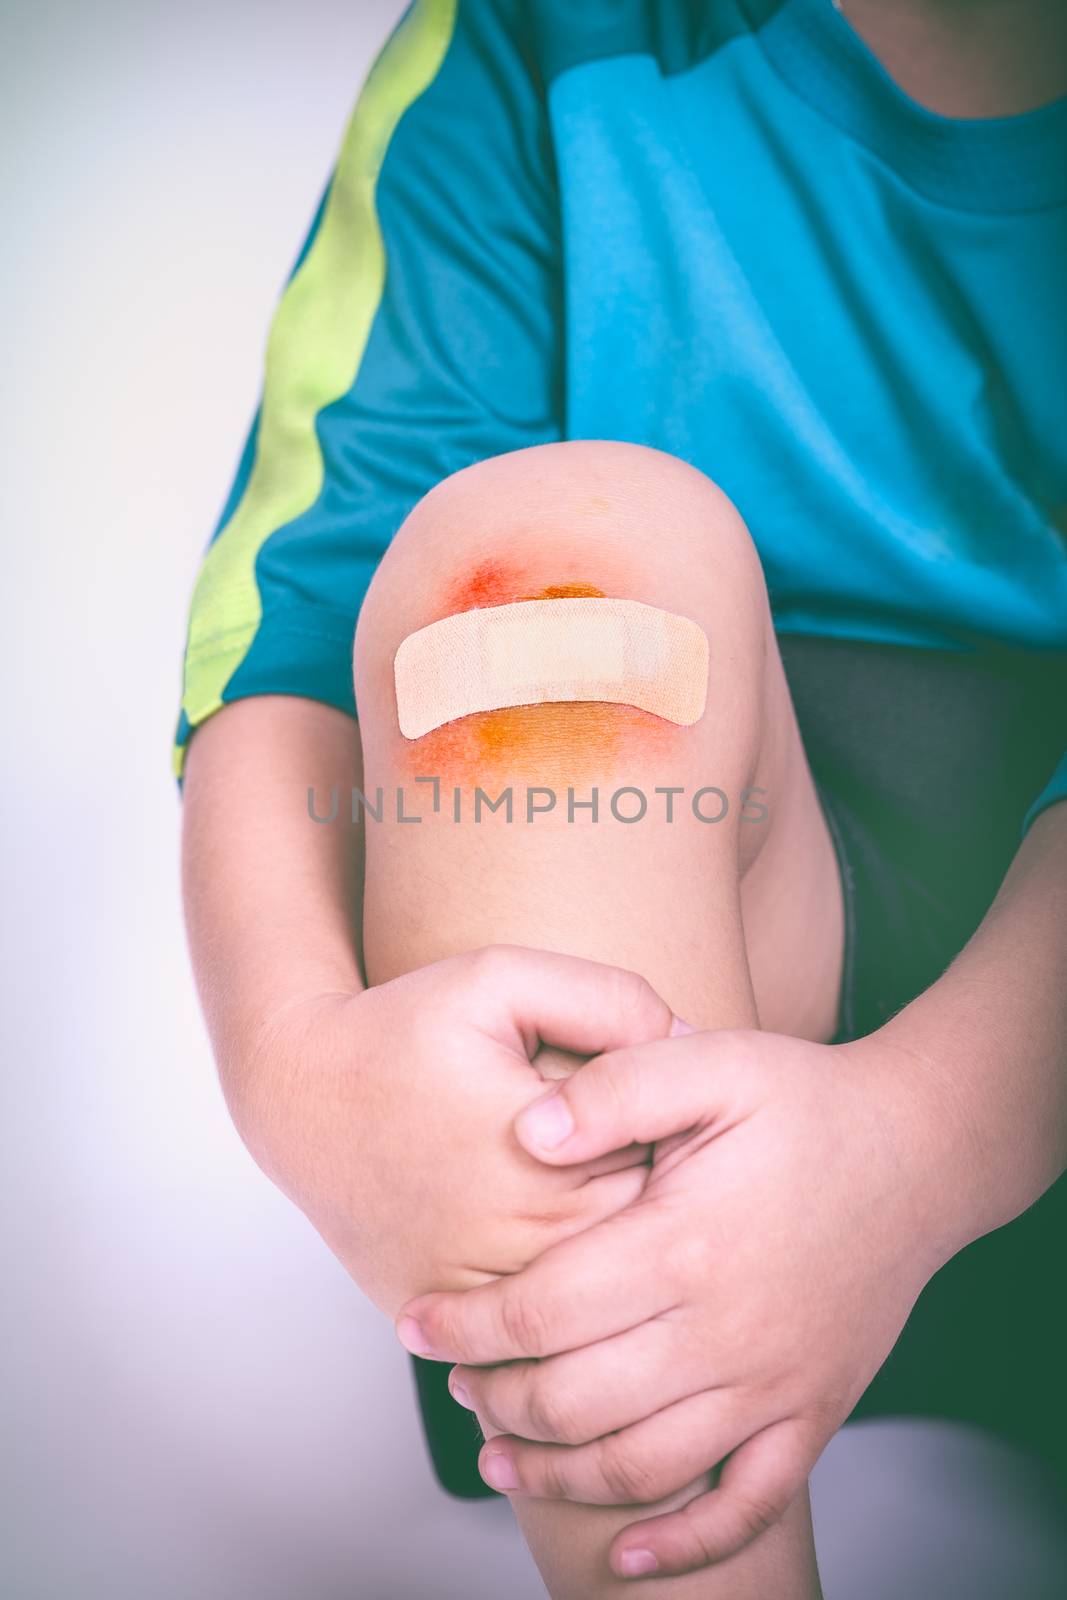 Athlete child injured. Child knee with a plaster and bruise. Vin by kdshutterman